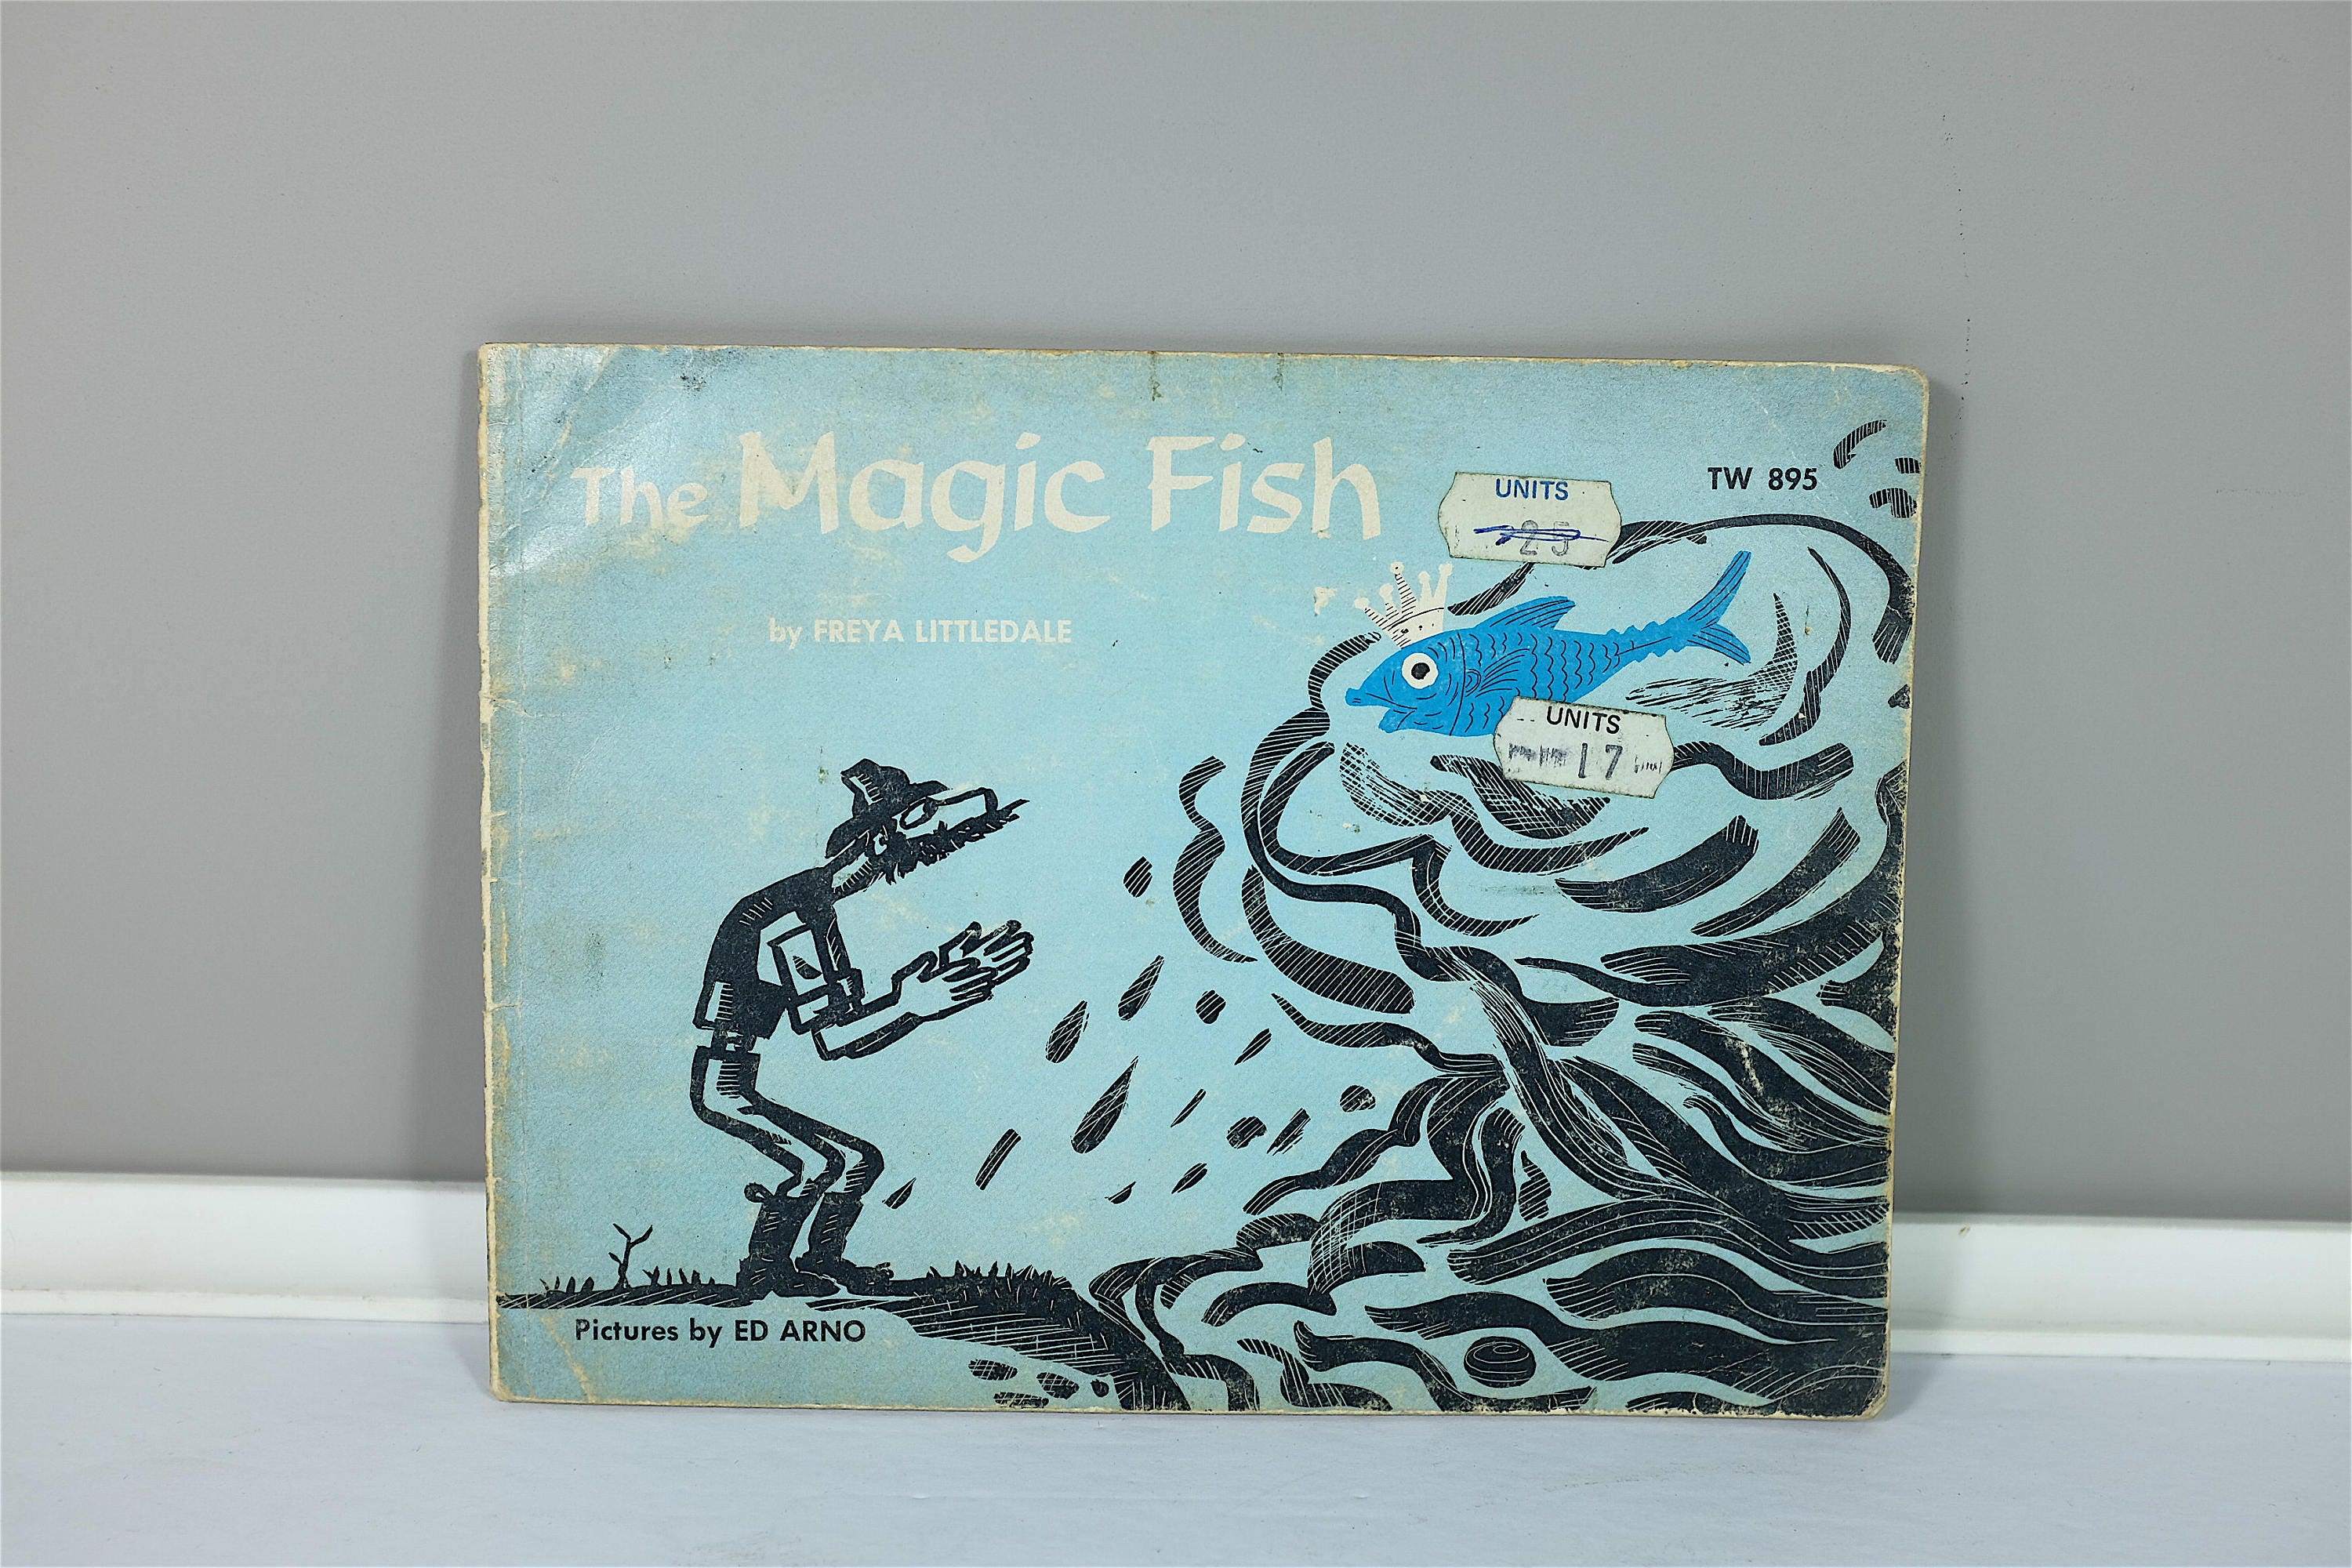 Vintage Children Book, the Magic Fish 1967 by Freya Littledale